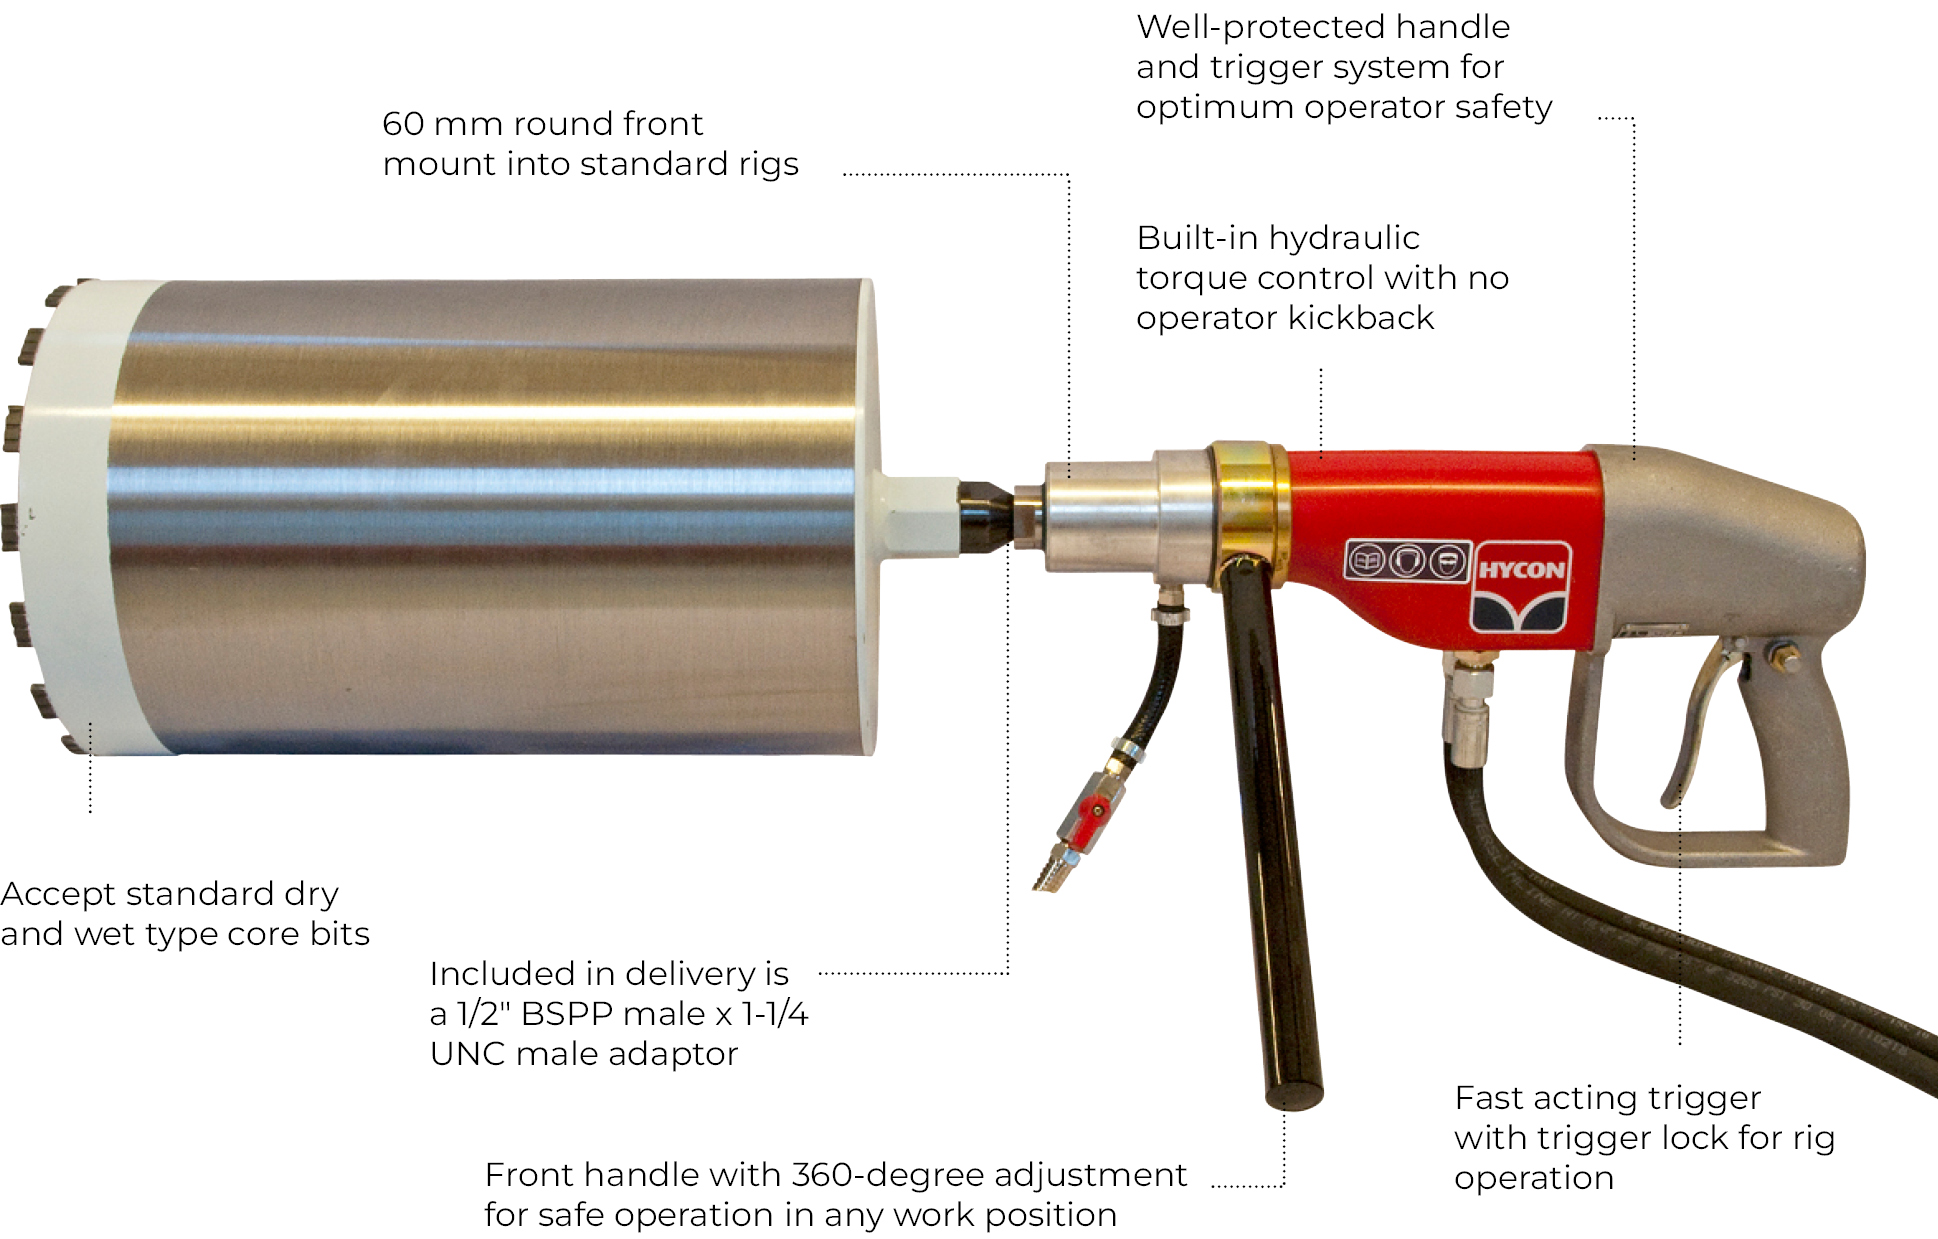 HYCON Hydraulic core drill with descriptive text for key attributes